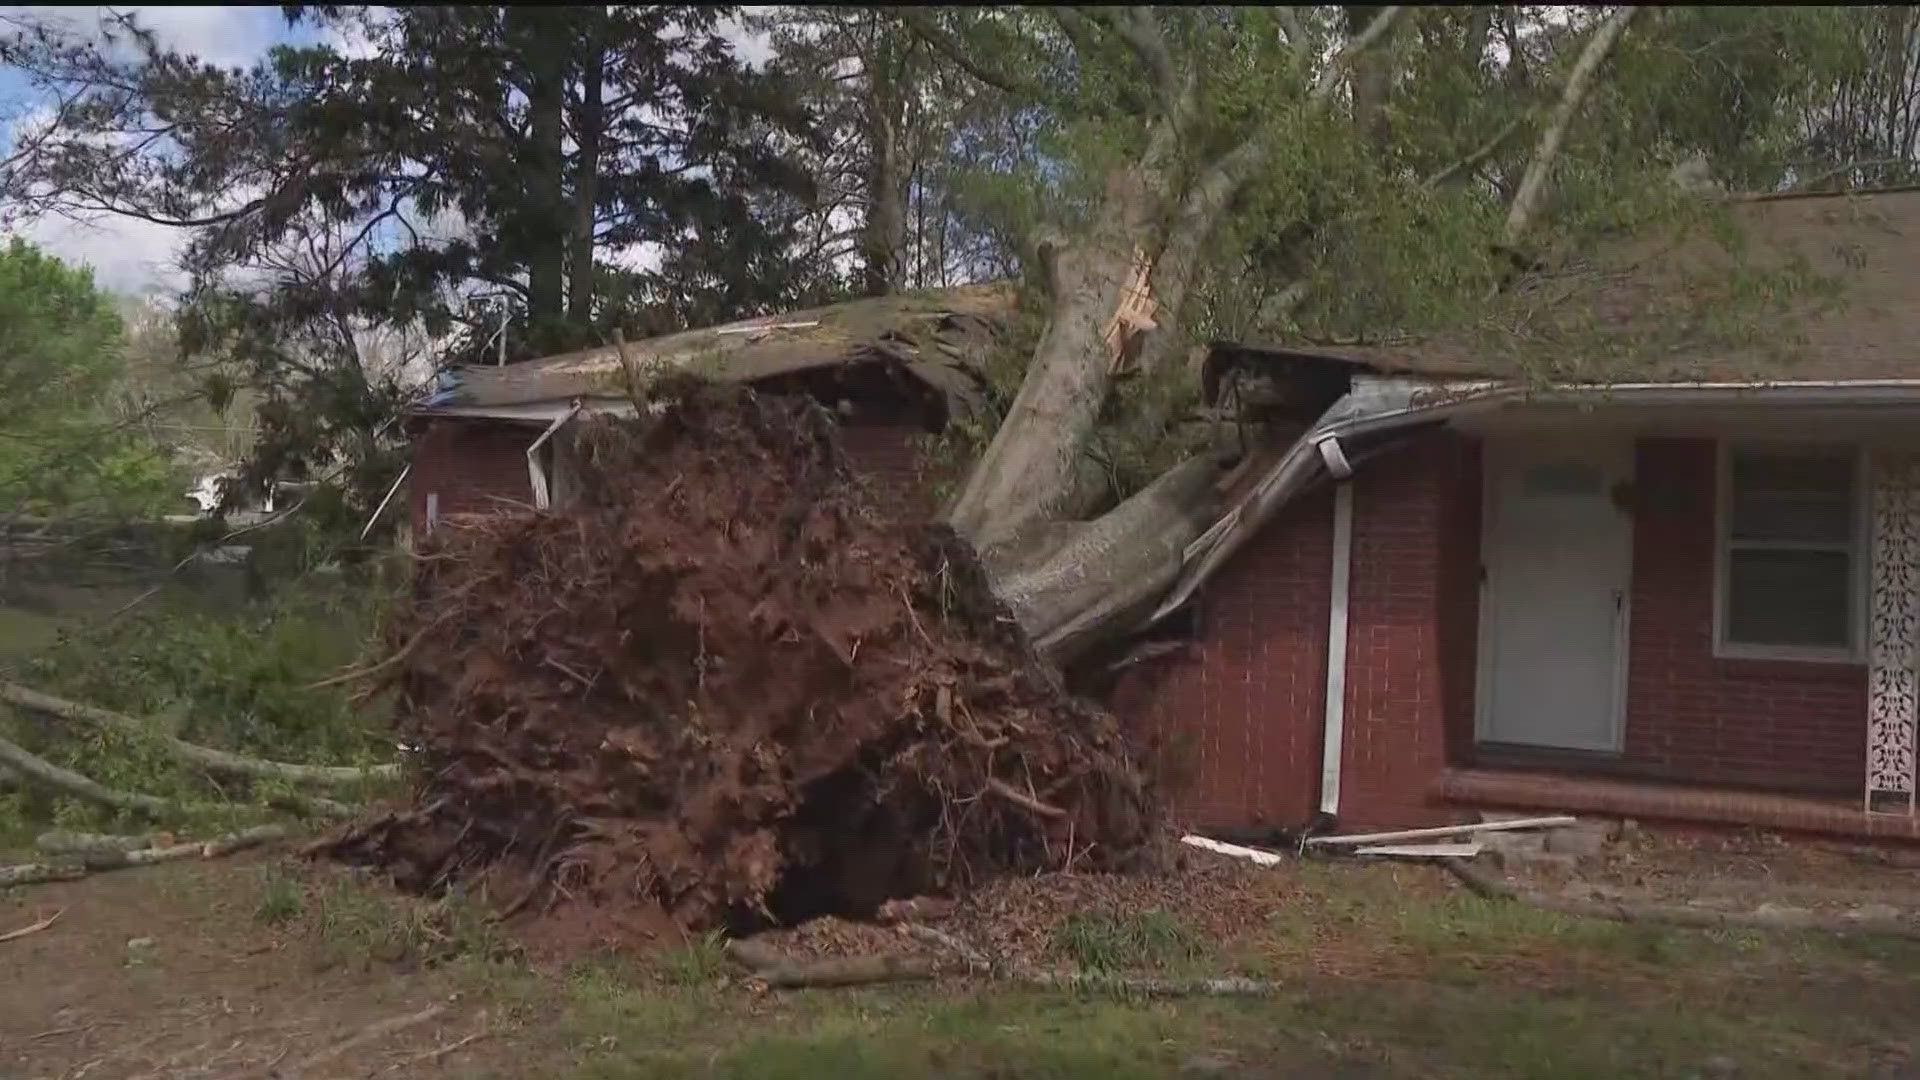 We talked to one resident who had a tree fall onto her home.